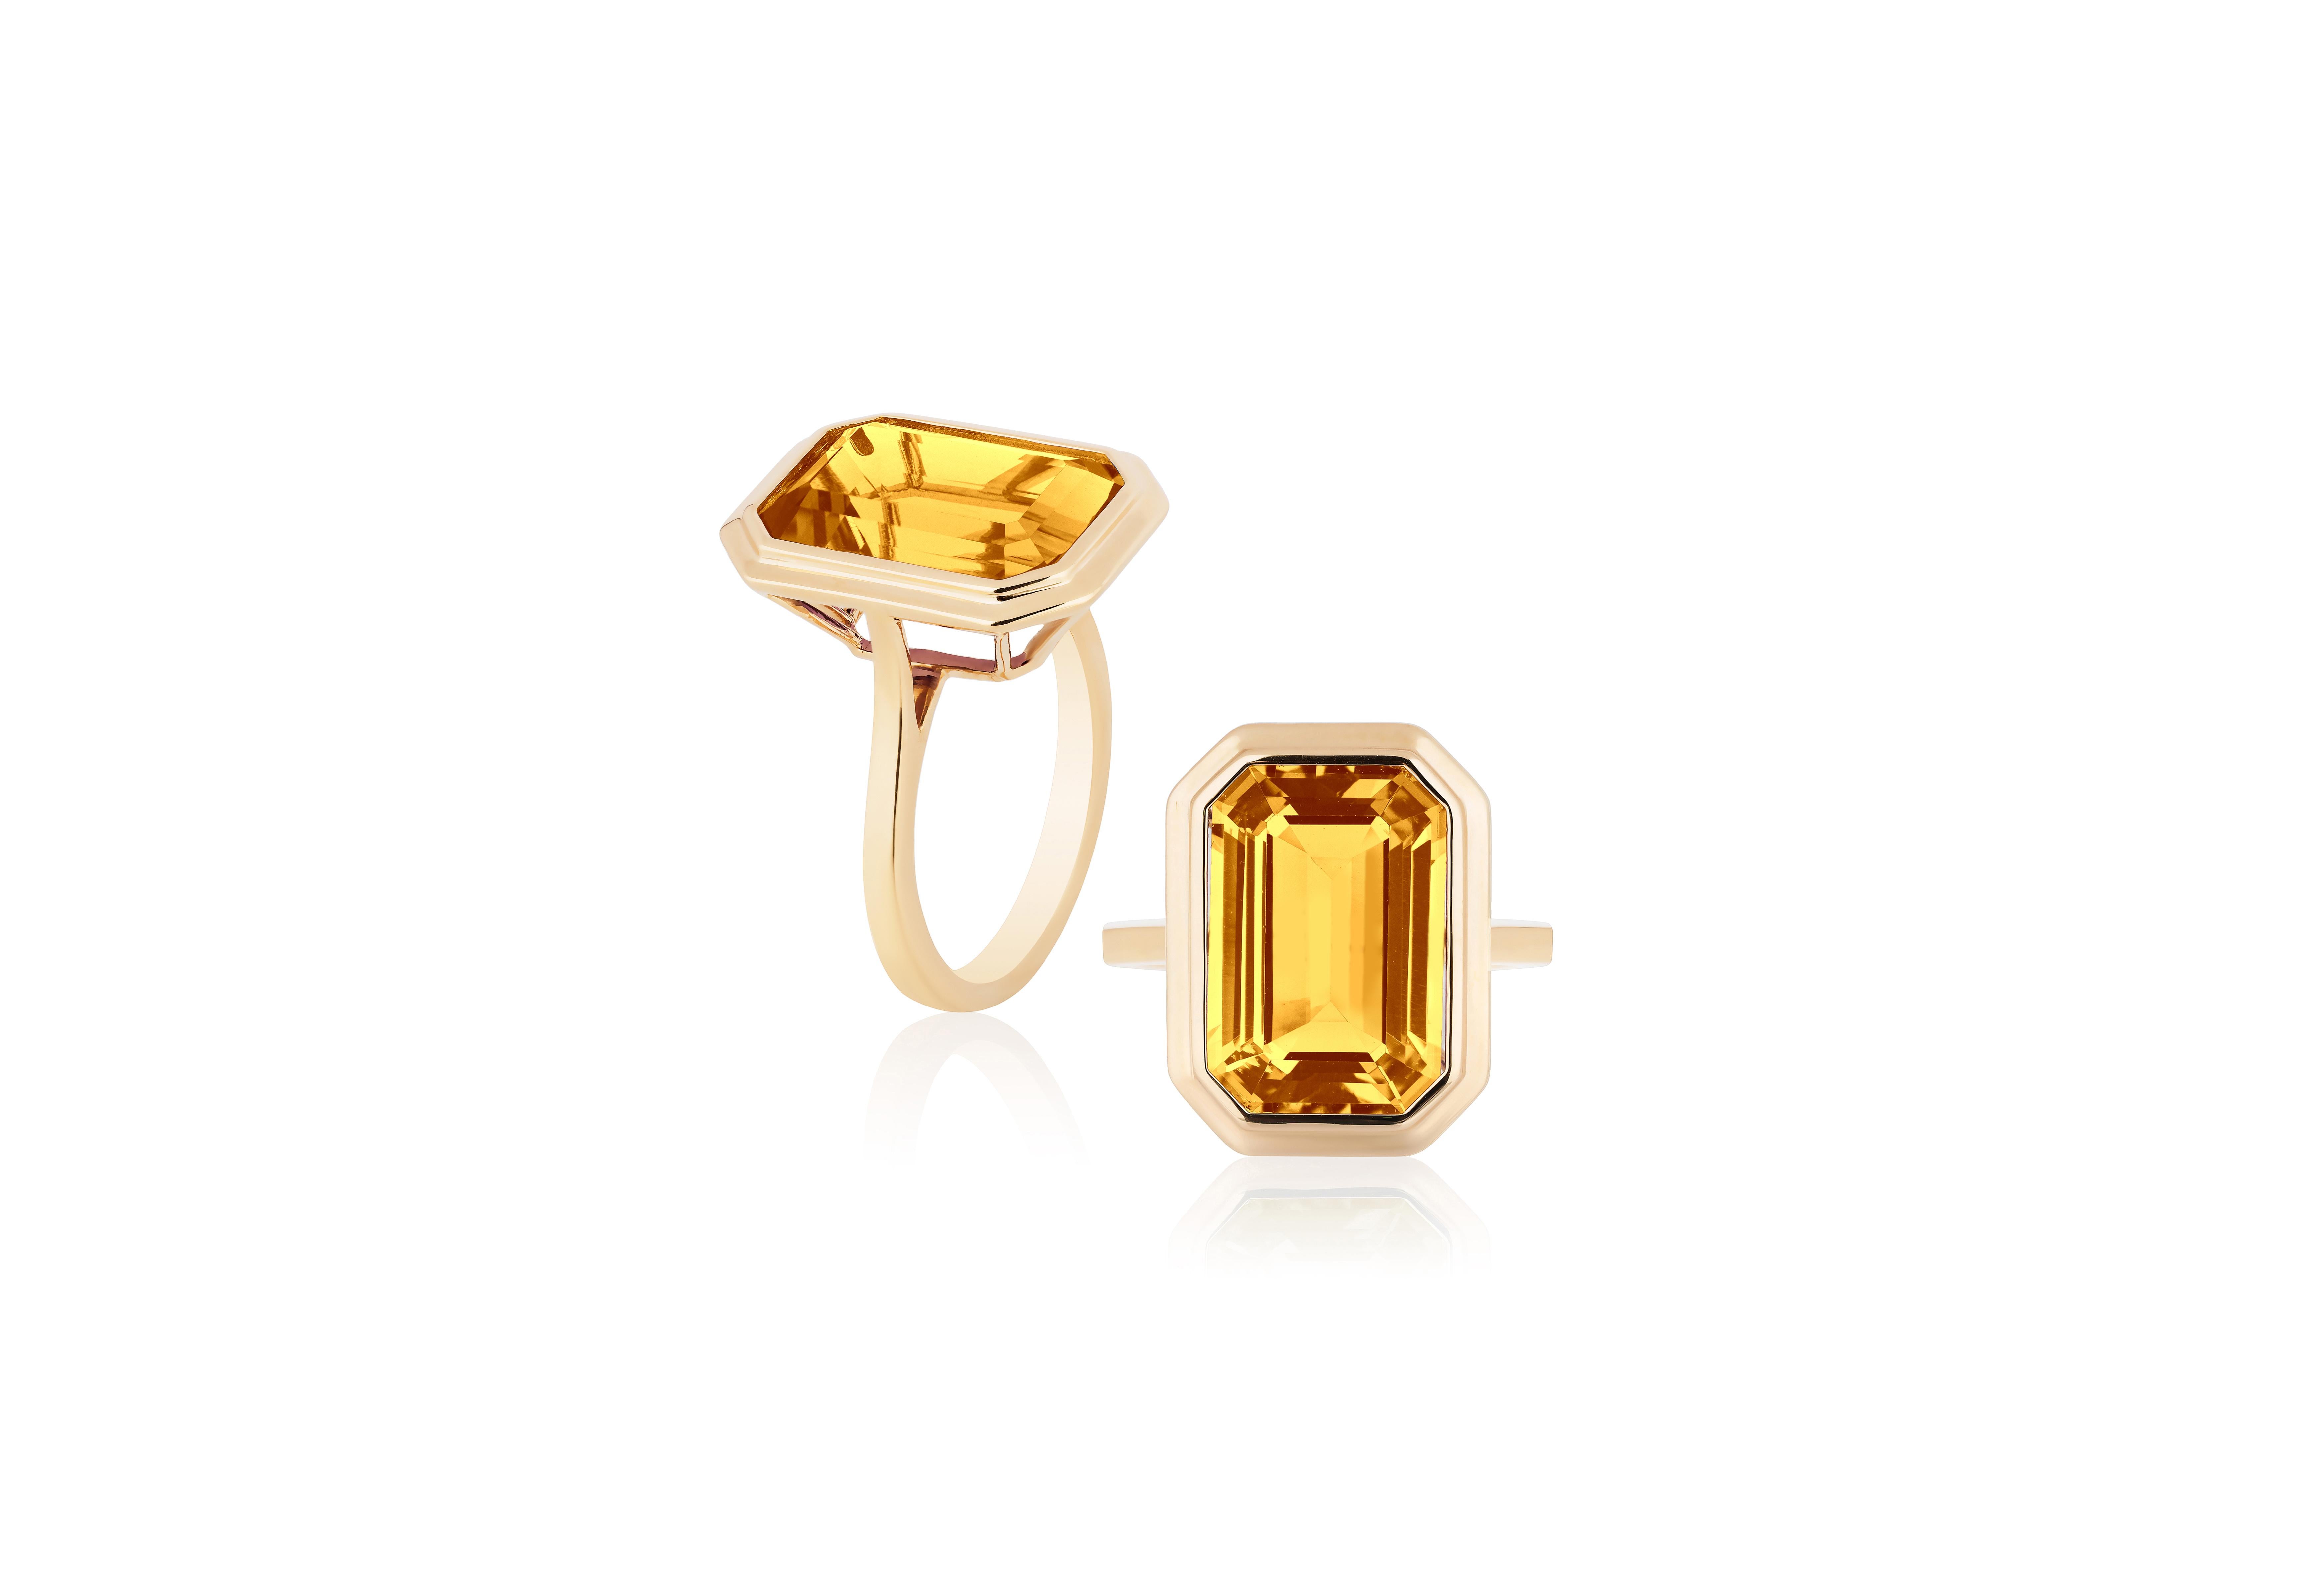 A classic yet an everyday bold statement piece, this amazing cocktail ring is part of our very new ‘Manhattan’ Collection. It has a 10 x 15 mm emerald cut Citrine in a bezel setting in 18k gold.   ​

Minimalist lines yet bold structures is what our